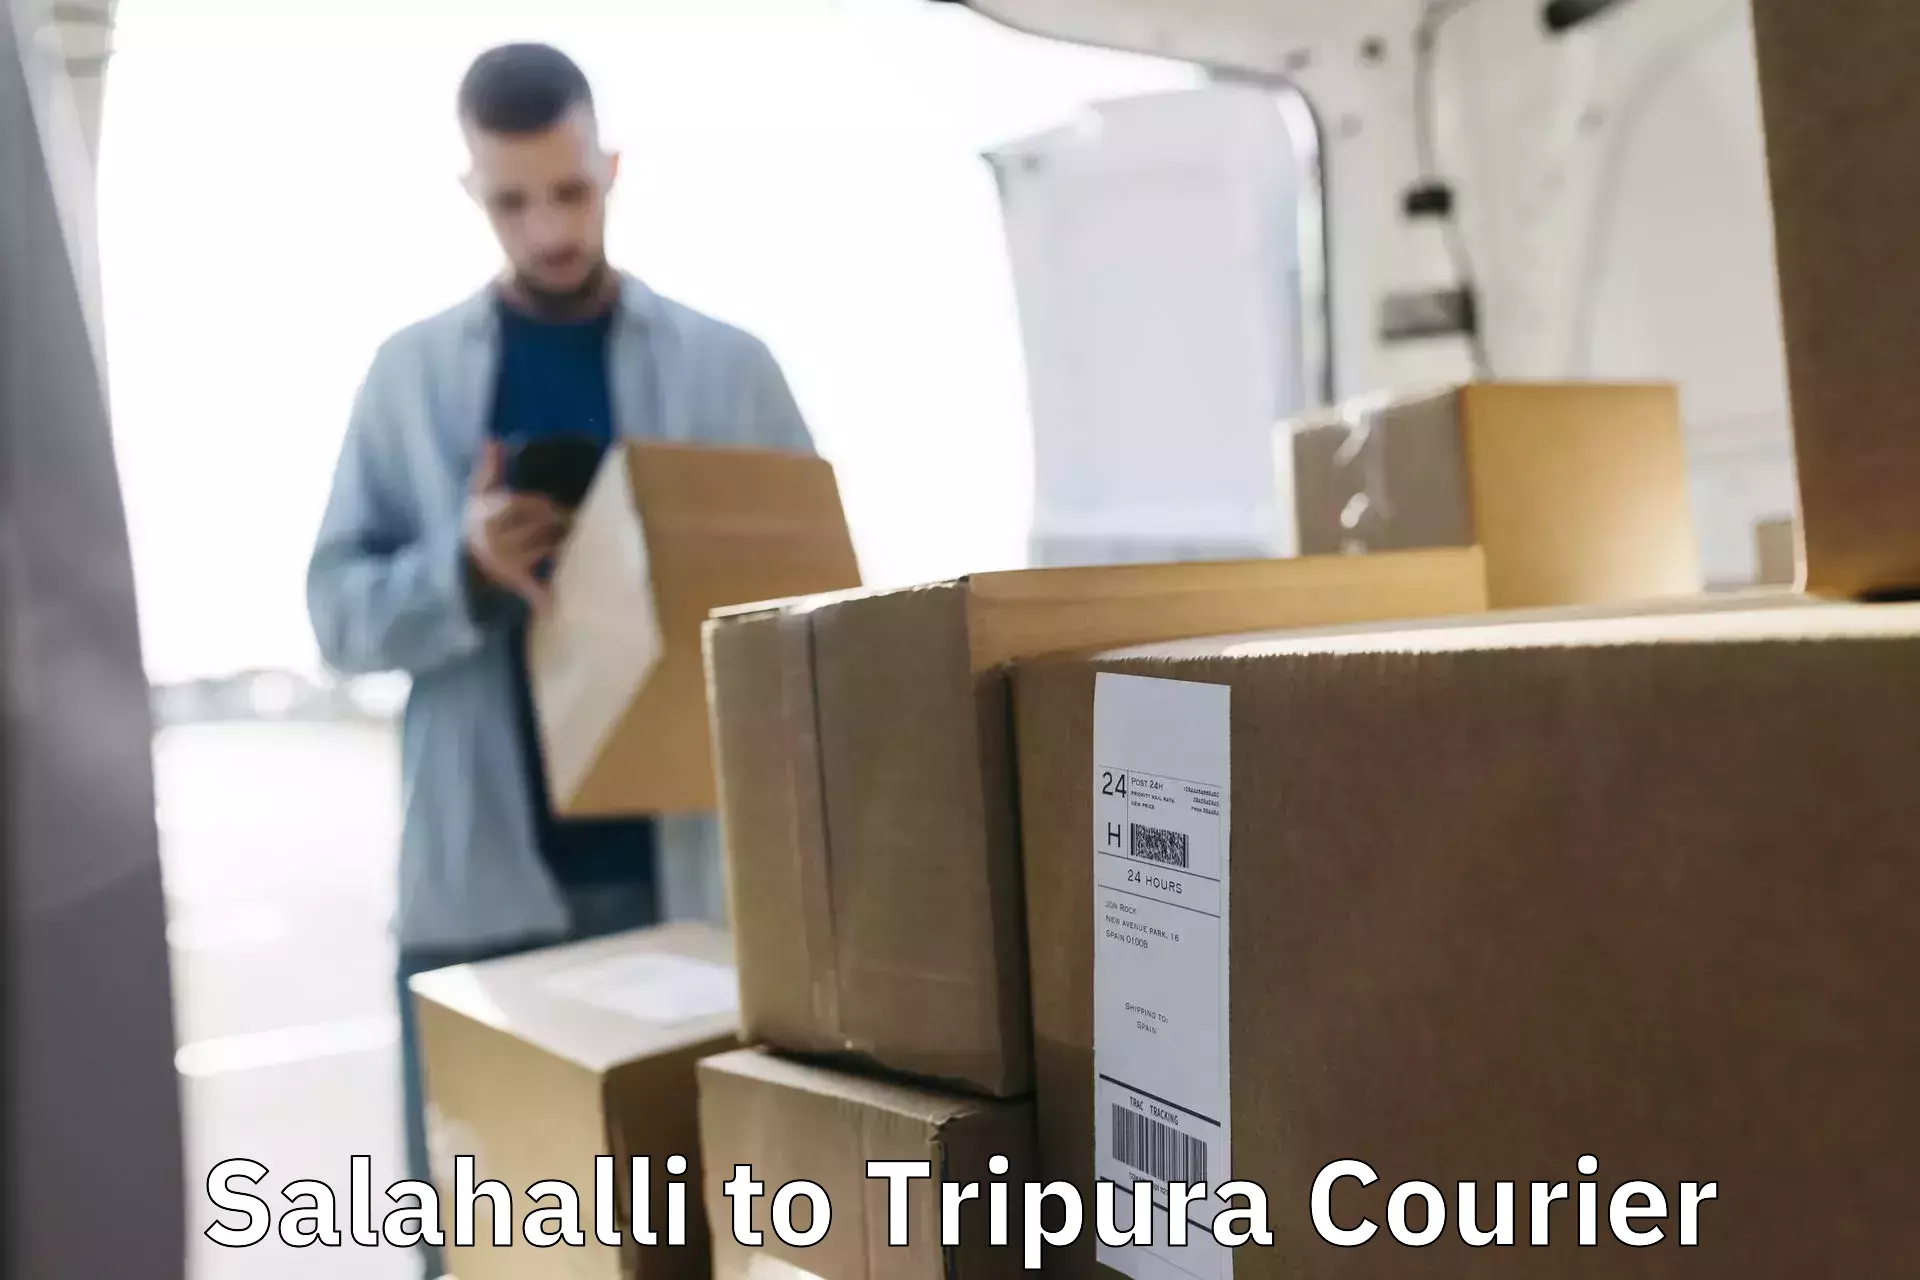 State-of-the-art courier technology Salahalli to South Tripura